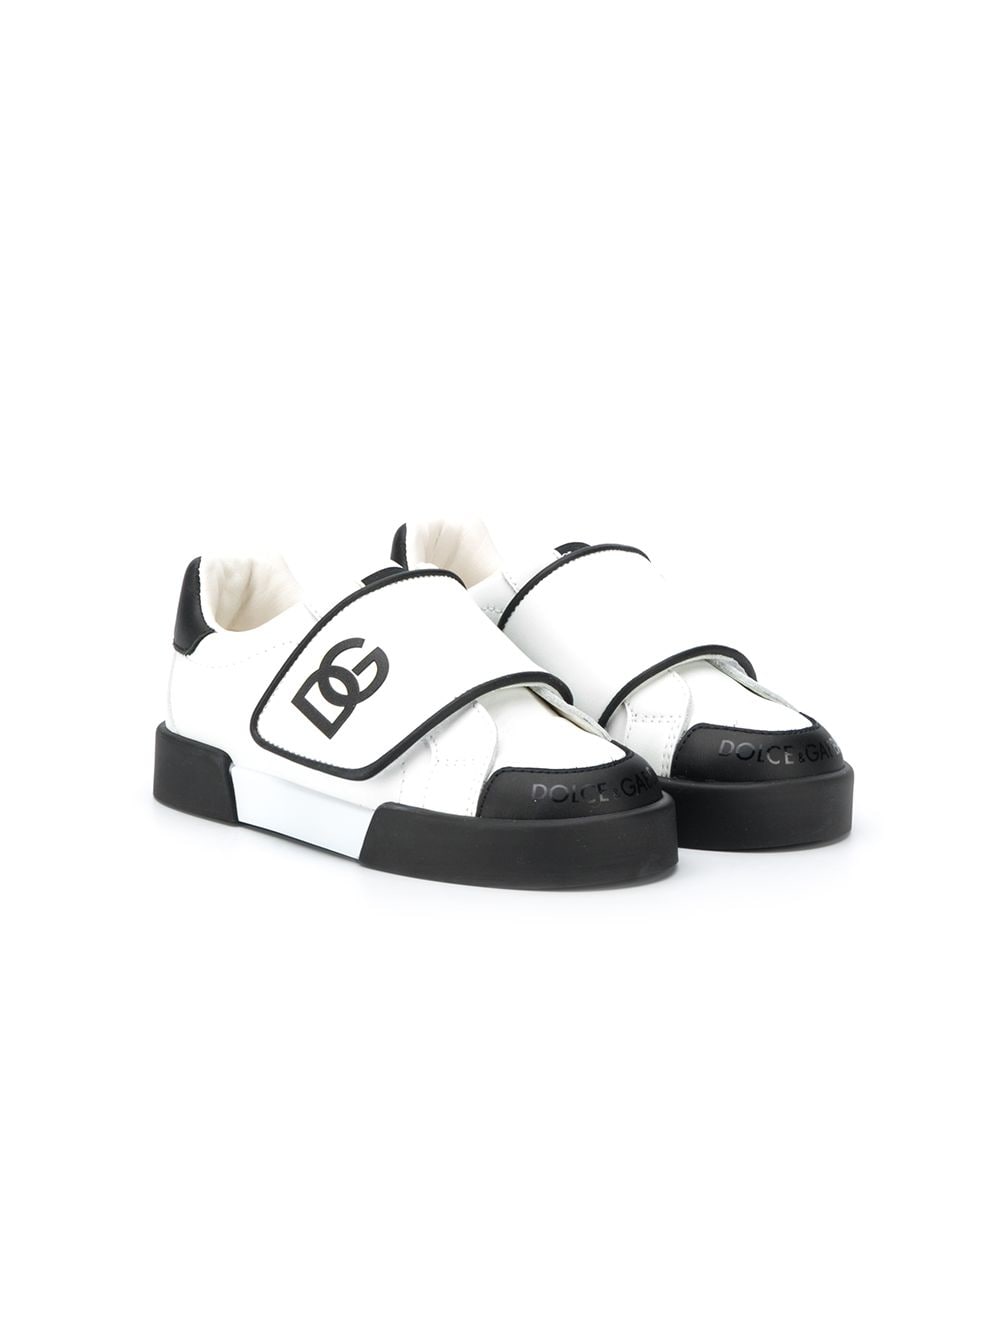 Dolce & Gabbana Kids' Portofino Light Sneakers With Dg Detail And Hook-and-loop Fastener In White/black